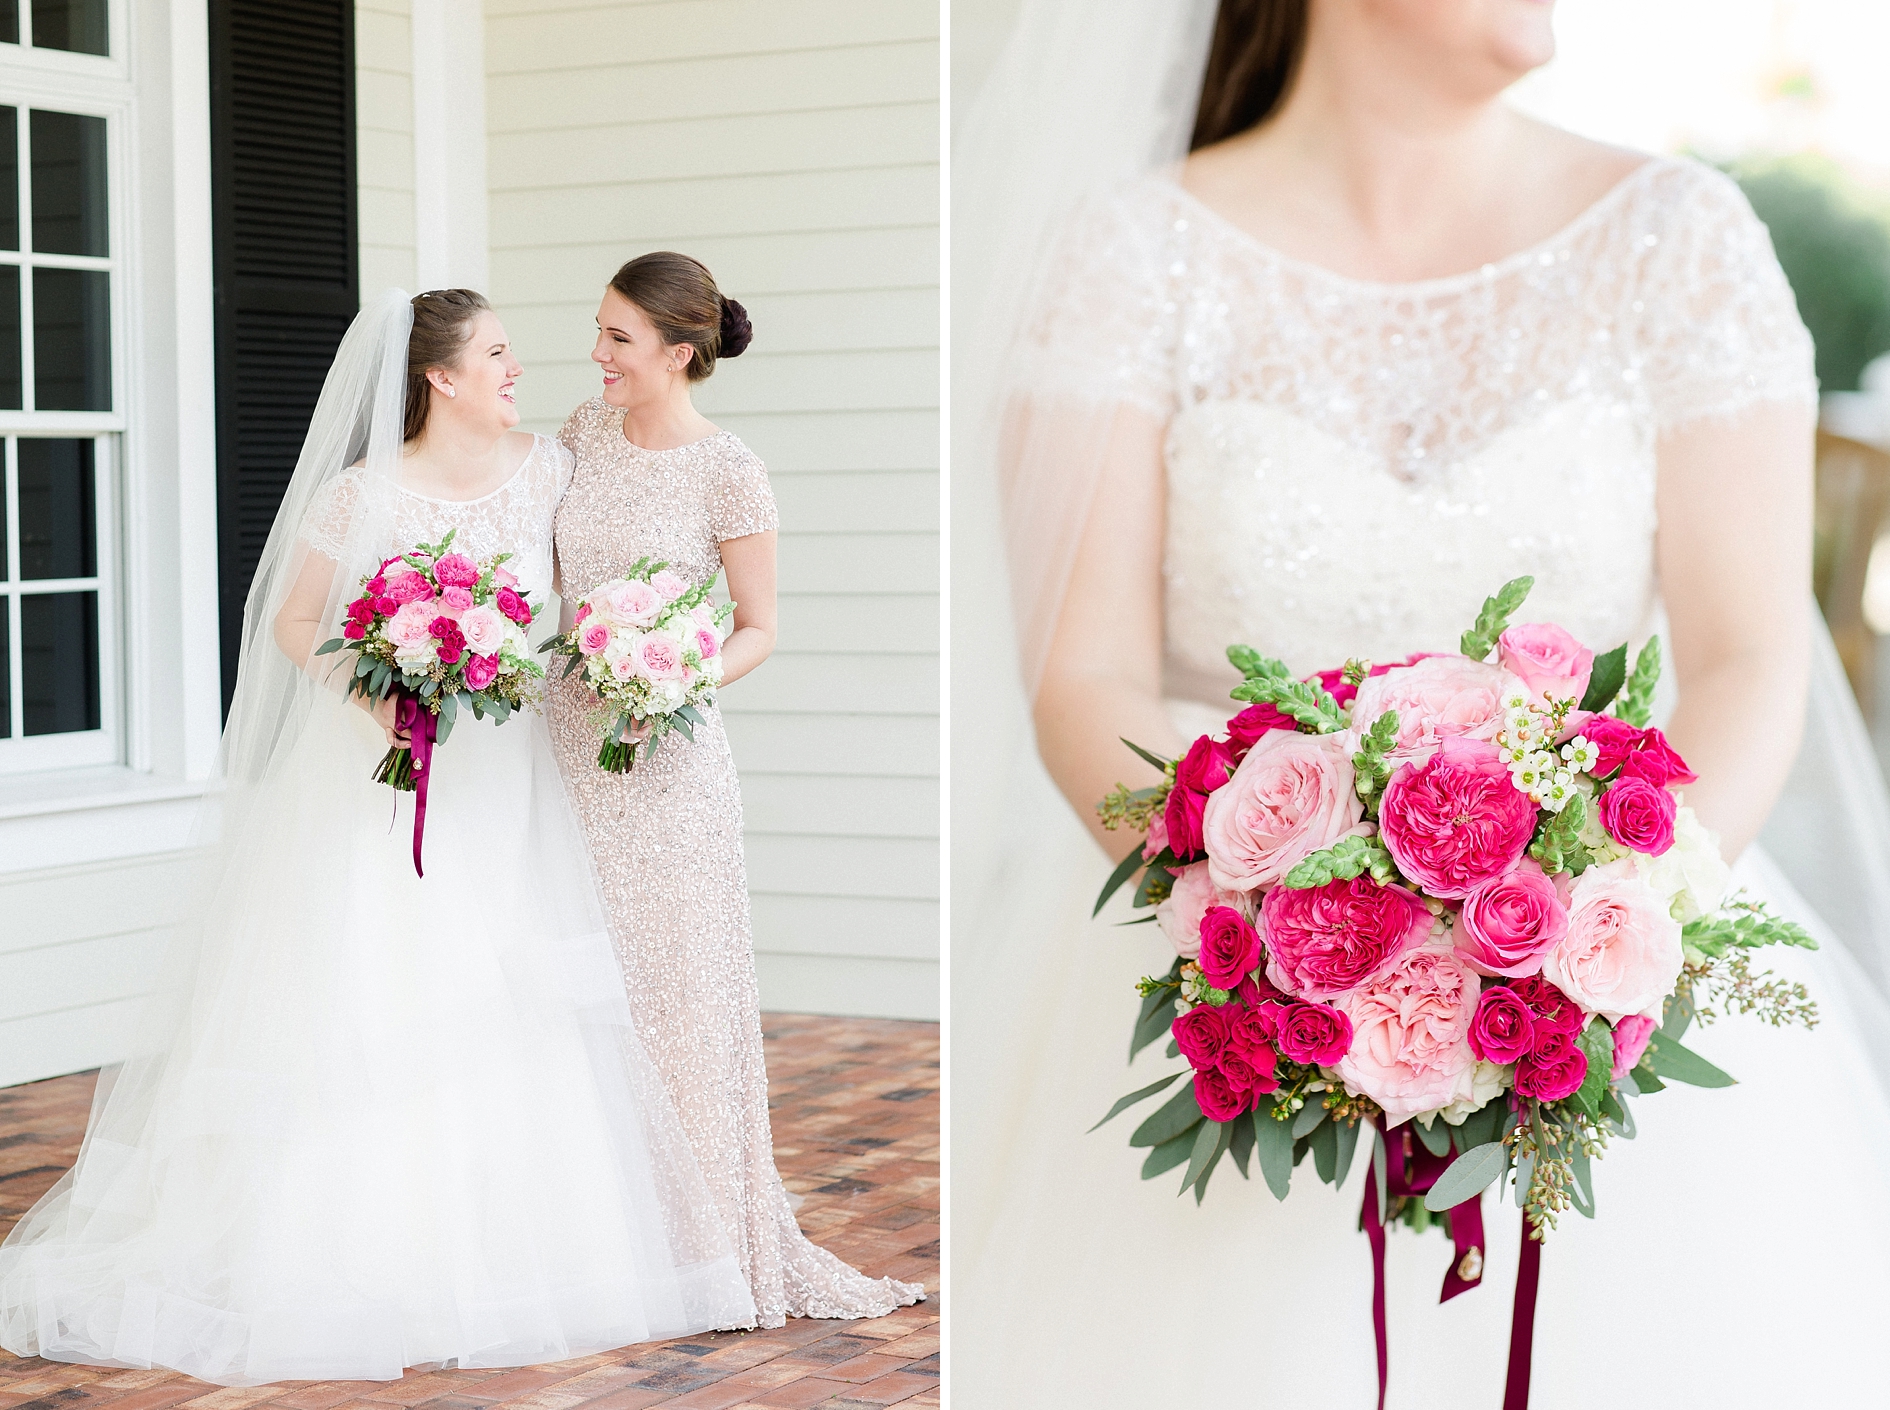 The Southern Hills Plantation | @ Ailyn La Torre Photography 2016